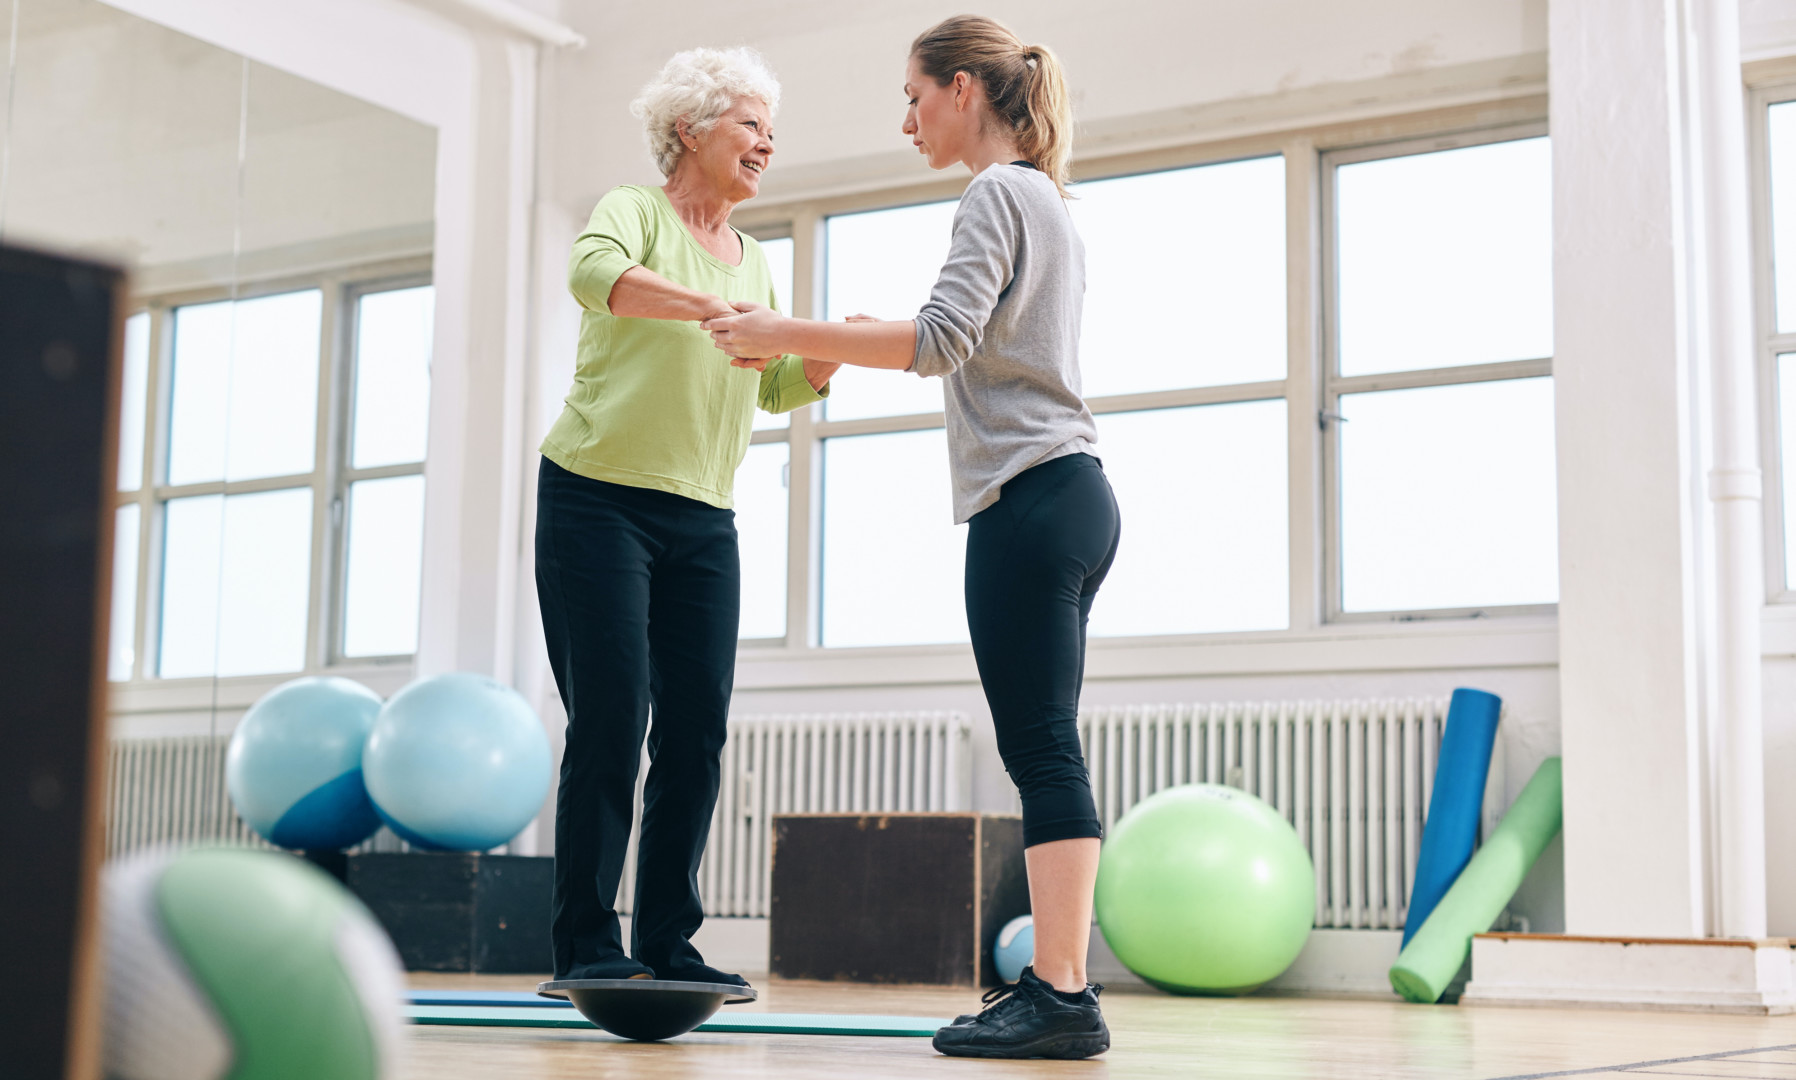 Female trainer helping senior woman in a gym exercising with a bosu balance training platform. Elder woman being assisted by gym instructor while workout session.